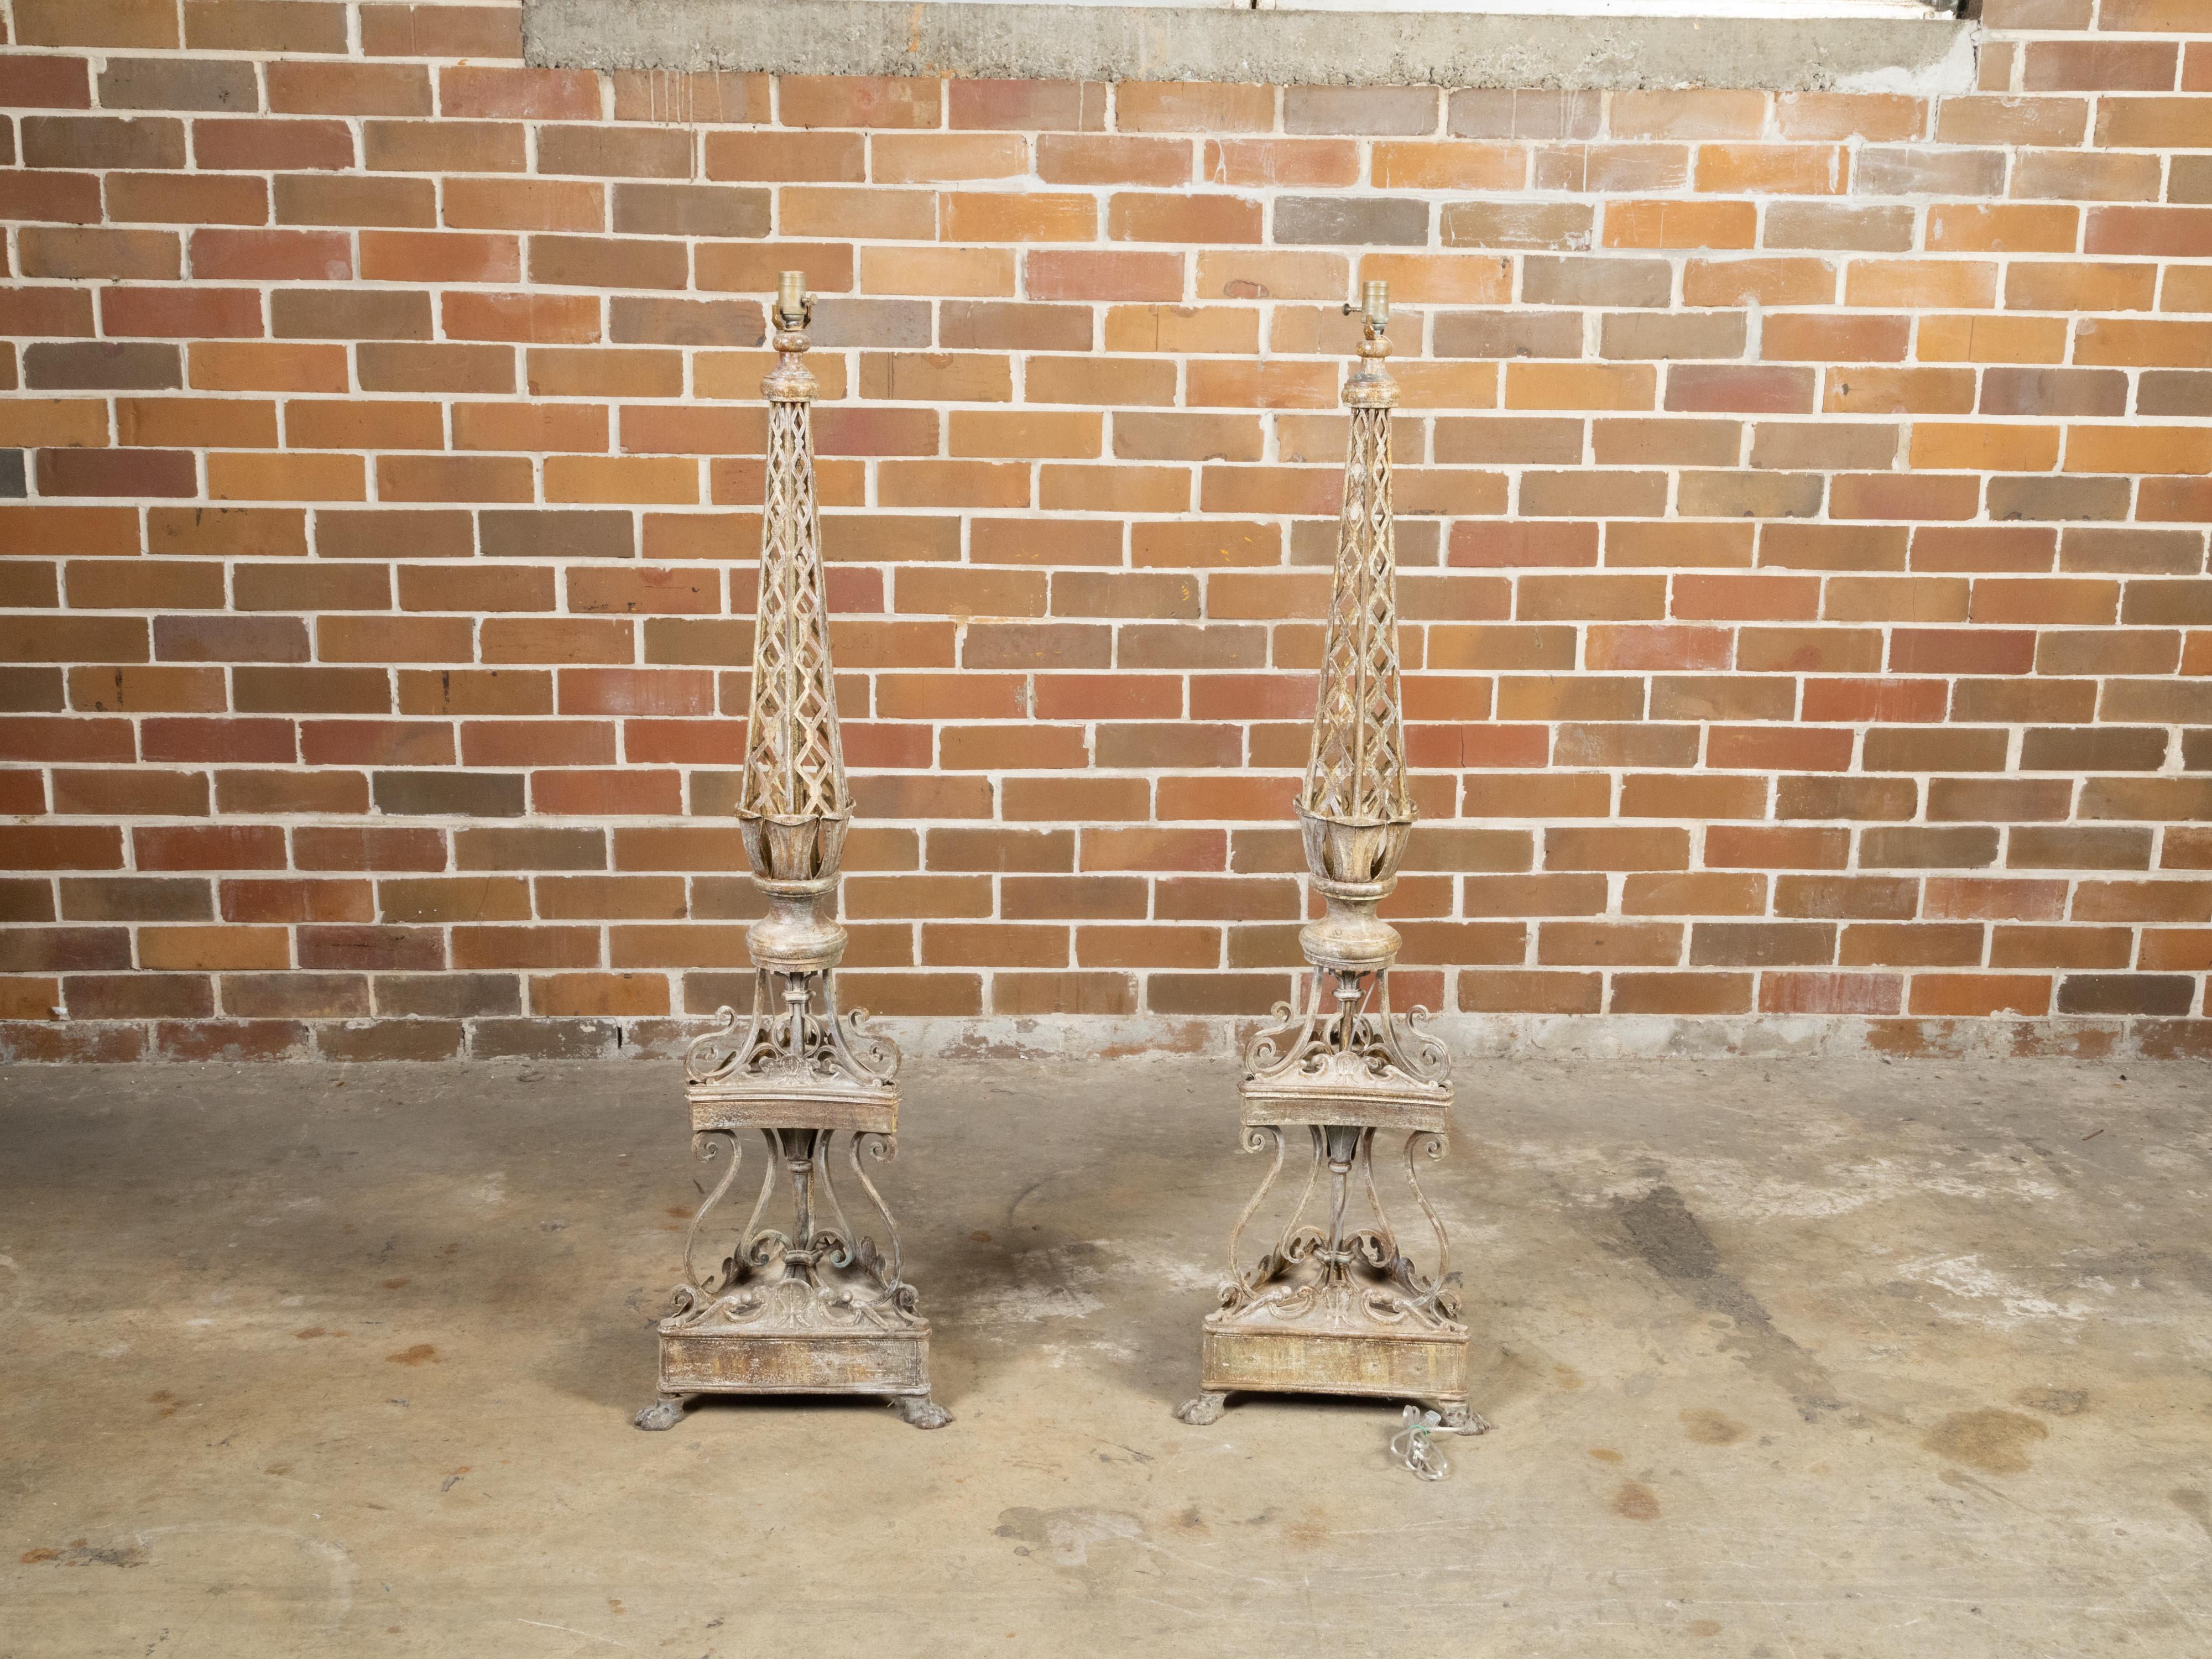 20th Century Pair of French 1920s Painted Iron Floor Lamps with Trellis and S-Scrolls, Wired